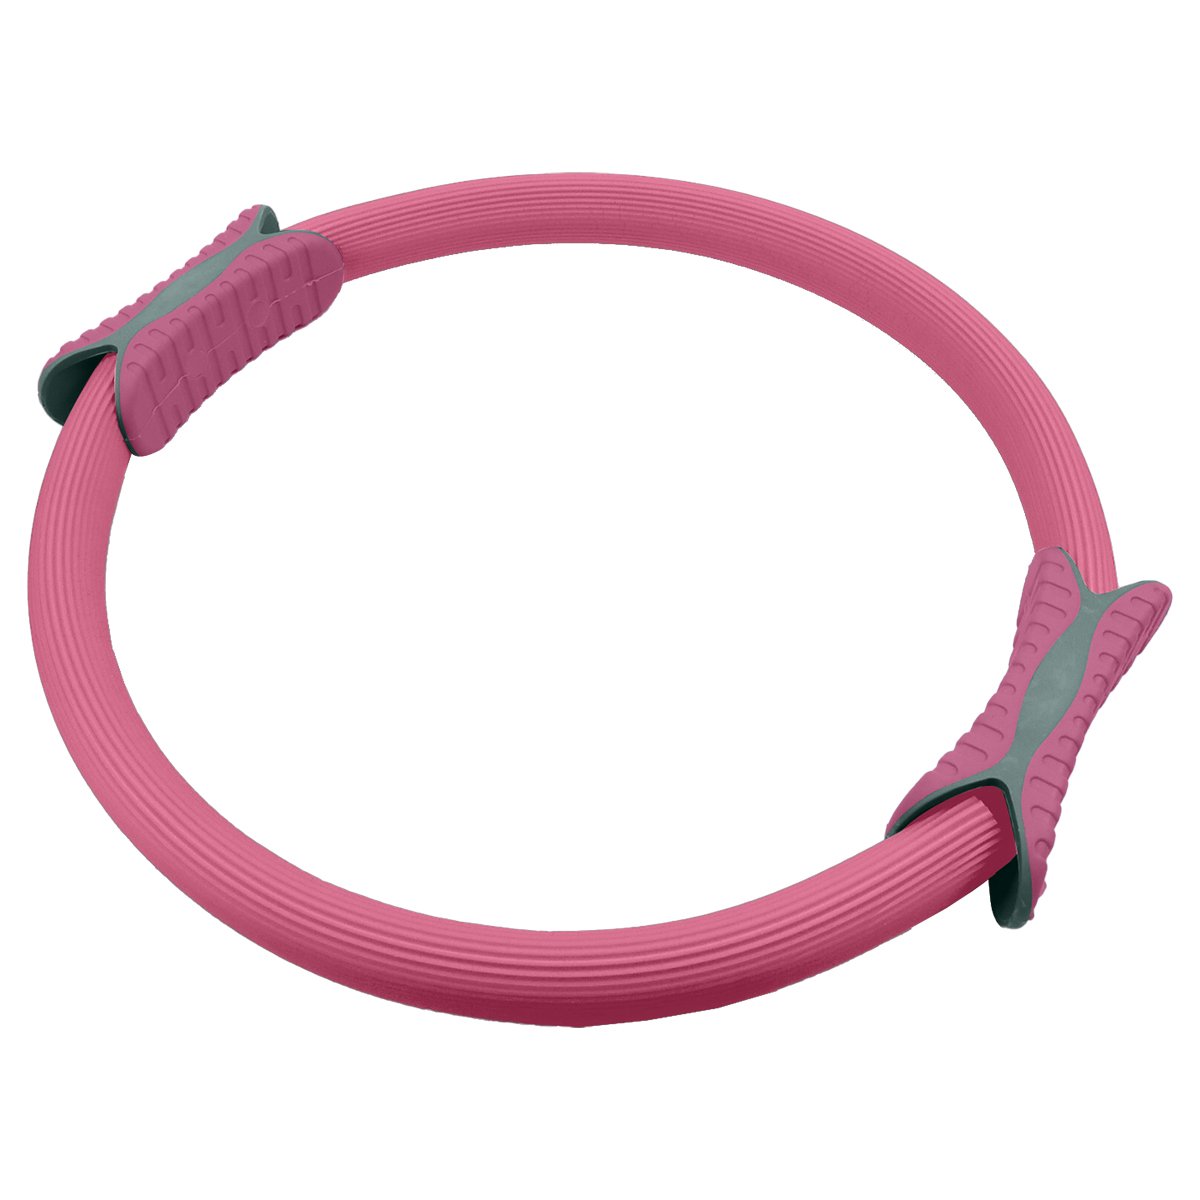 Powertrain Pilates Ring Band Yoga Home Workout Exercise Band Pink 1